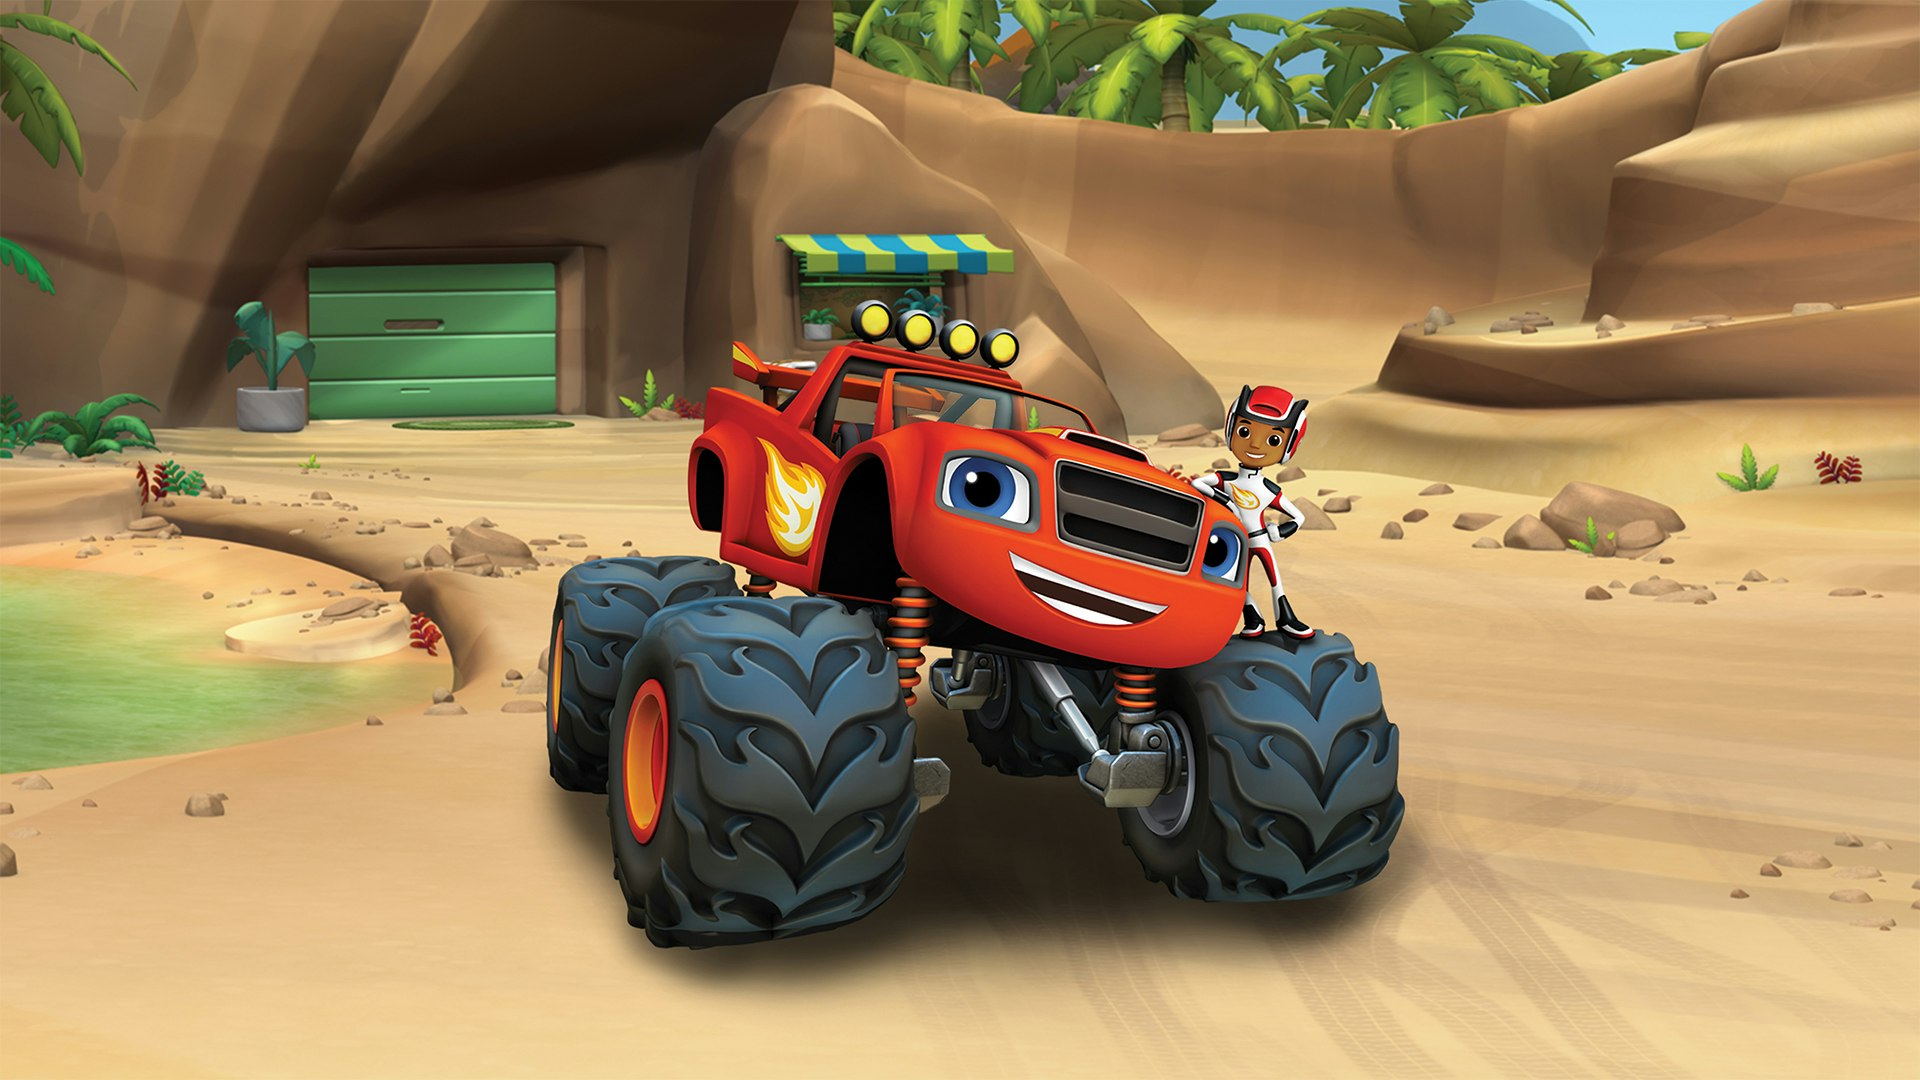 Blaze and the Monster Machines - streaming online